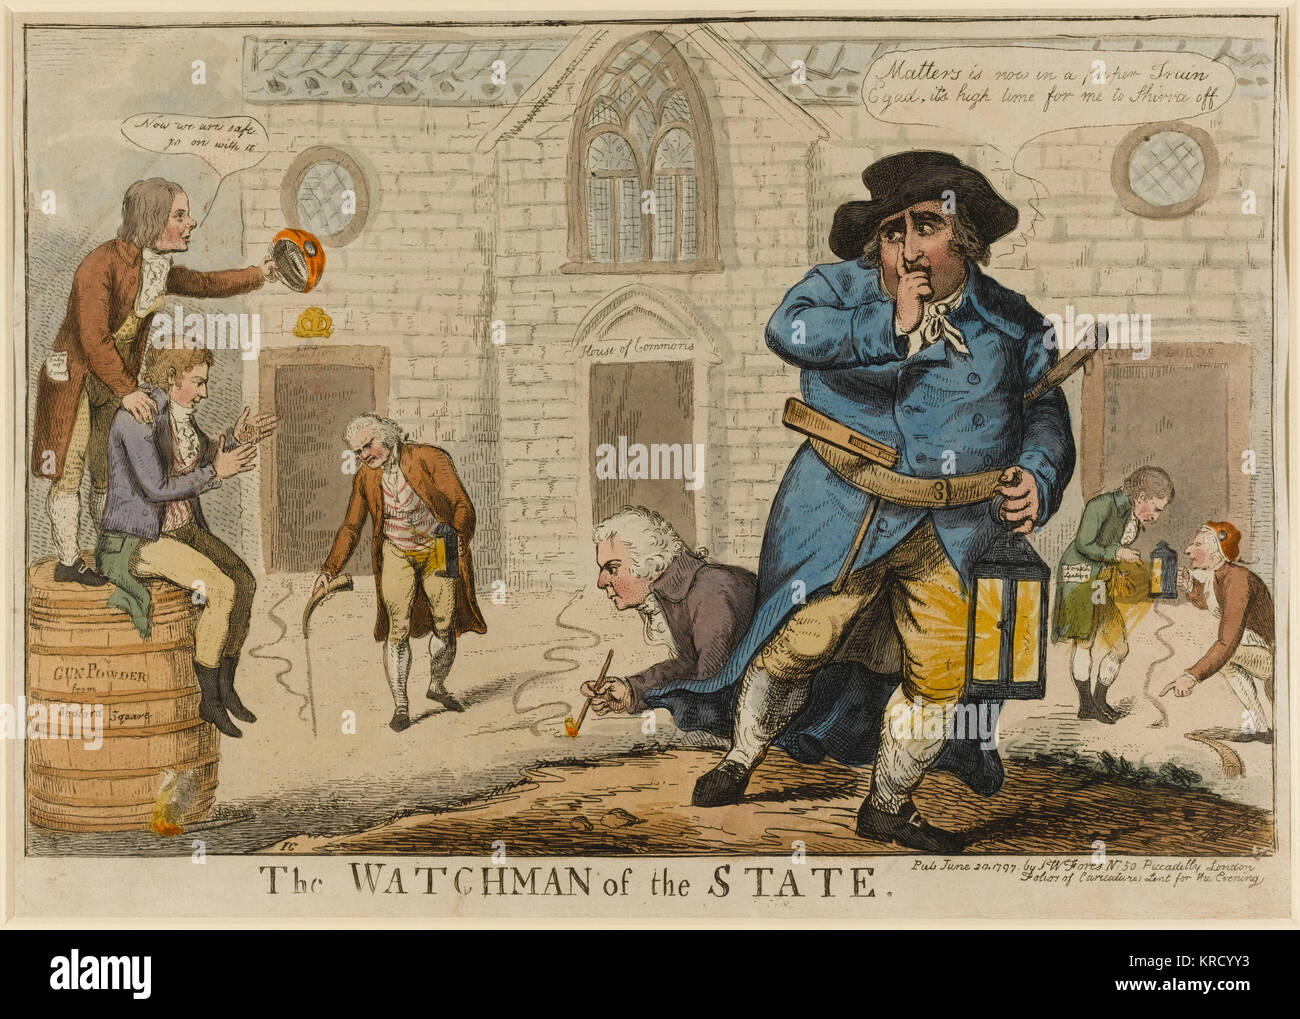 Satirical cartoon, The Watchman of the State.  Fox dressed as a watchman slips away as another gunpowder plot takes place.  Three lines of gunpowder lead towards the House of Parliament.  The lines laid by Horne Tooke, Sheridan, Thelwall and Stanhope lead to doorways labelled Constitution, House of Commons and House of Lords.  A satire on the partial secession of the leaders of the Opposition from Parliament.  The Whigs were persistently misrepresented in caricatures as colluding with the radicals.       Date: 1797 Stock Photo